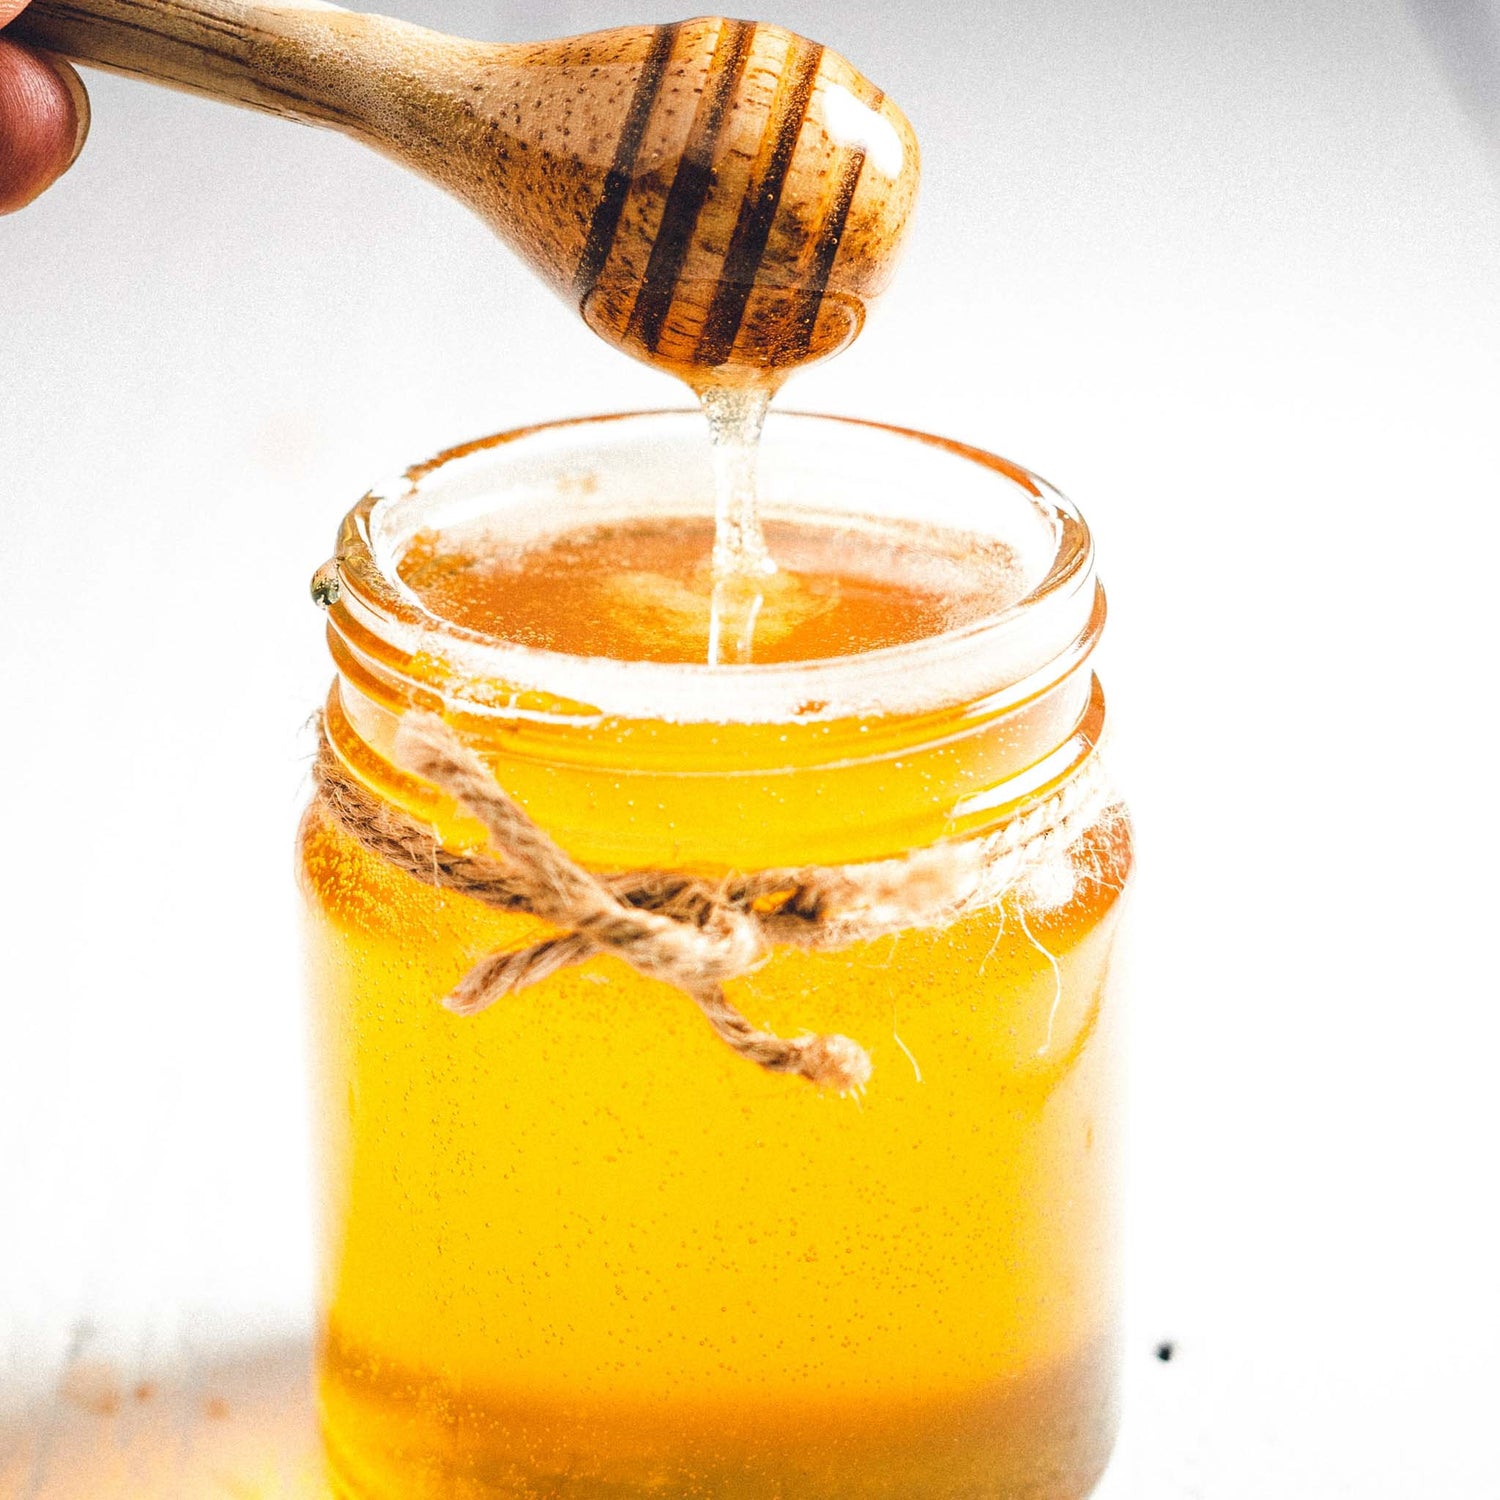 Honey dipped out of glass jar.